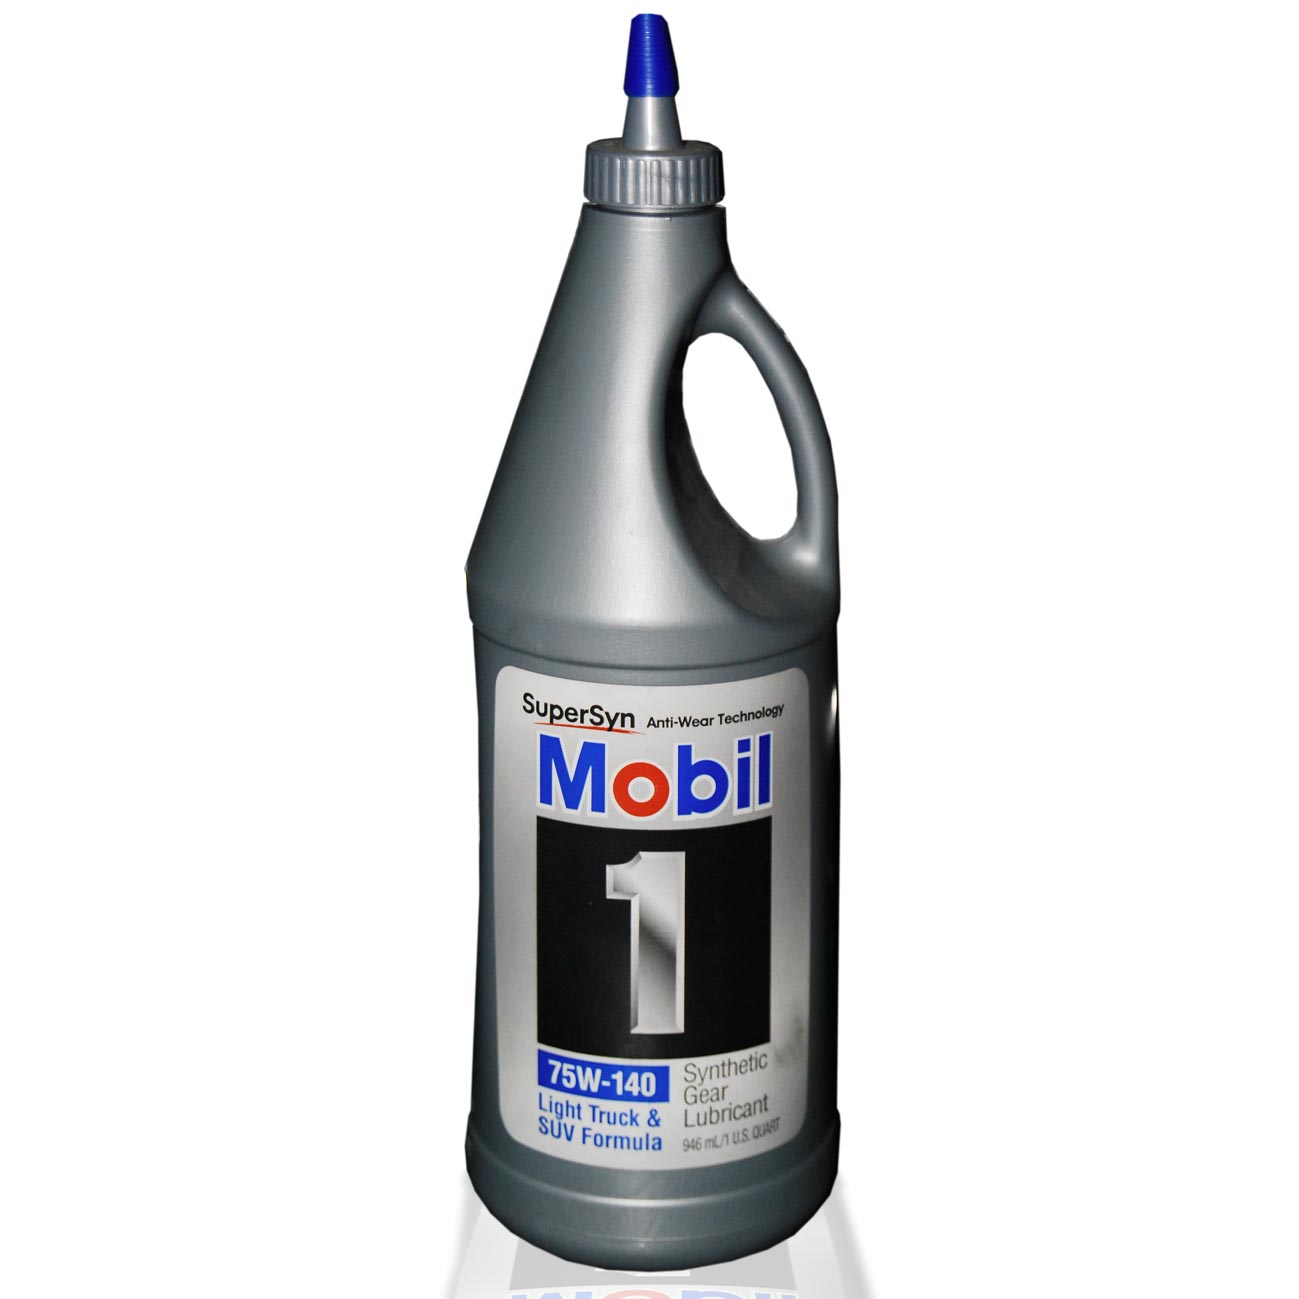 Mobil Synthetic Gear Lubricant LS 75W-140